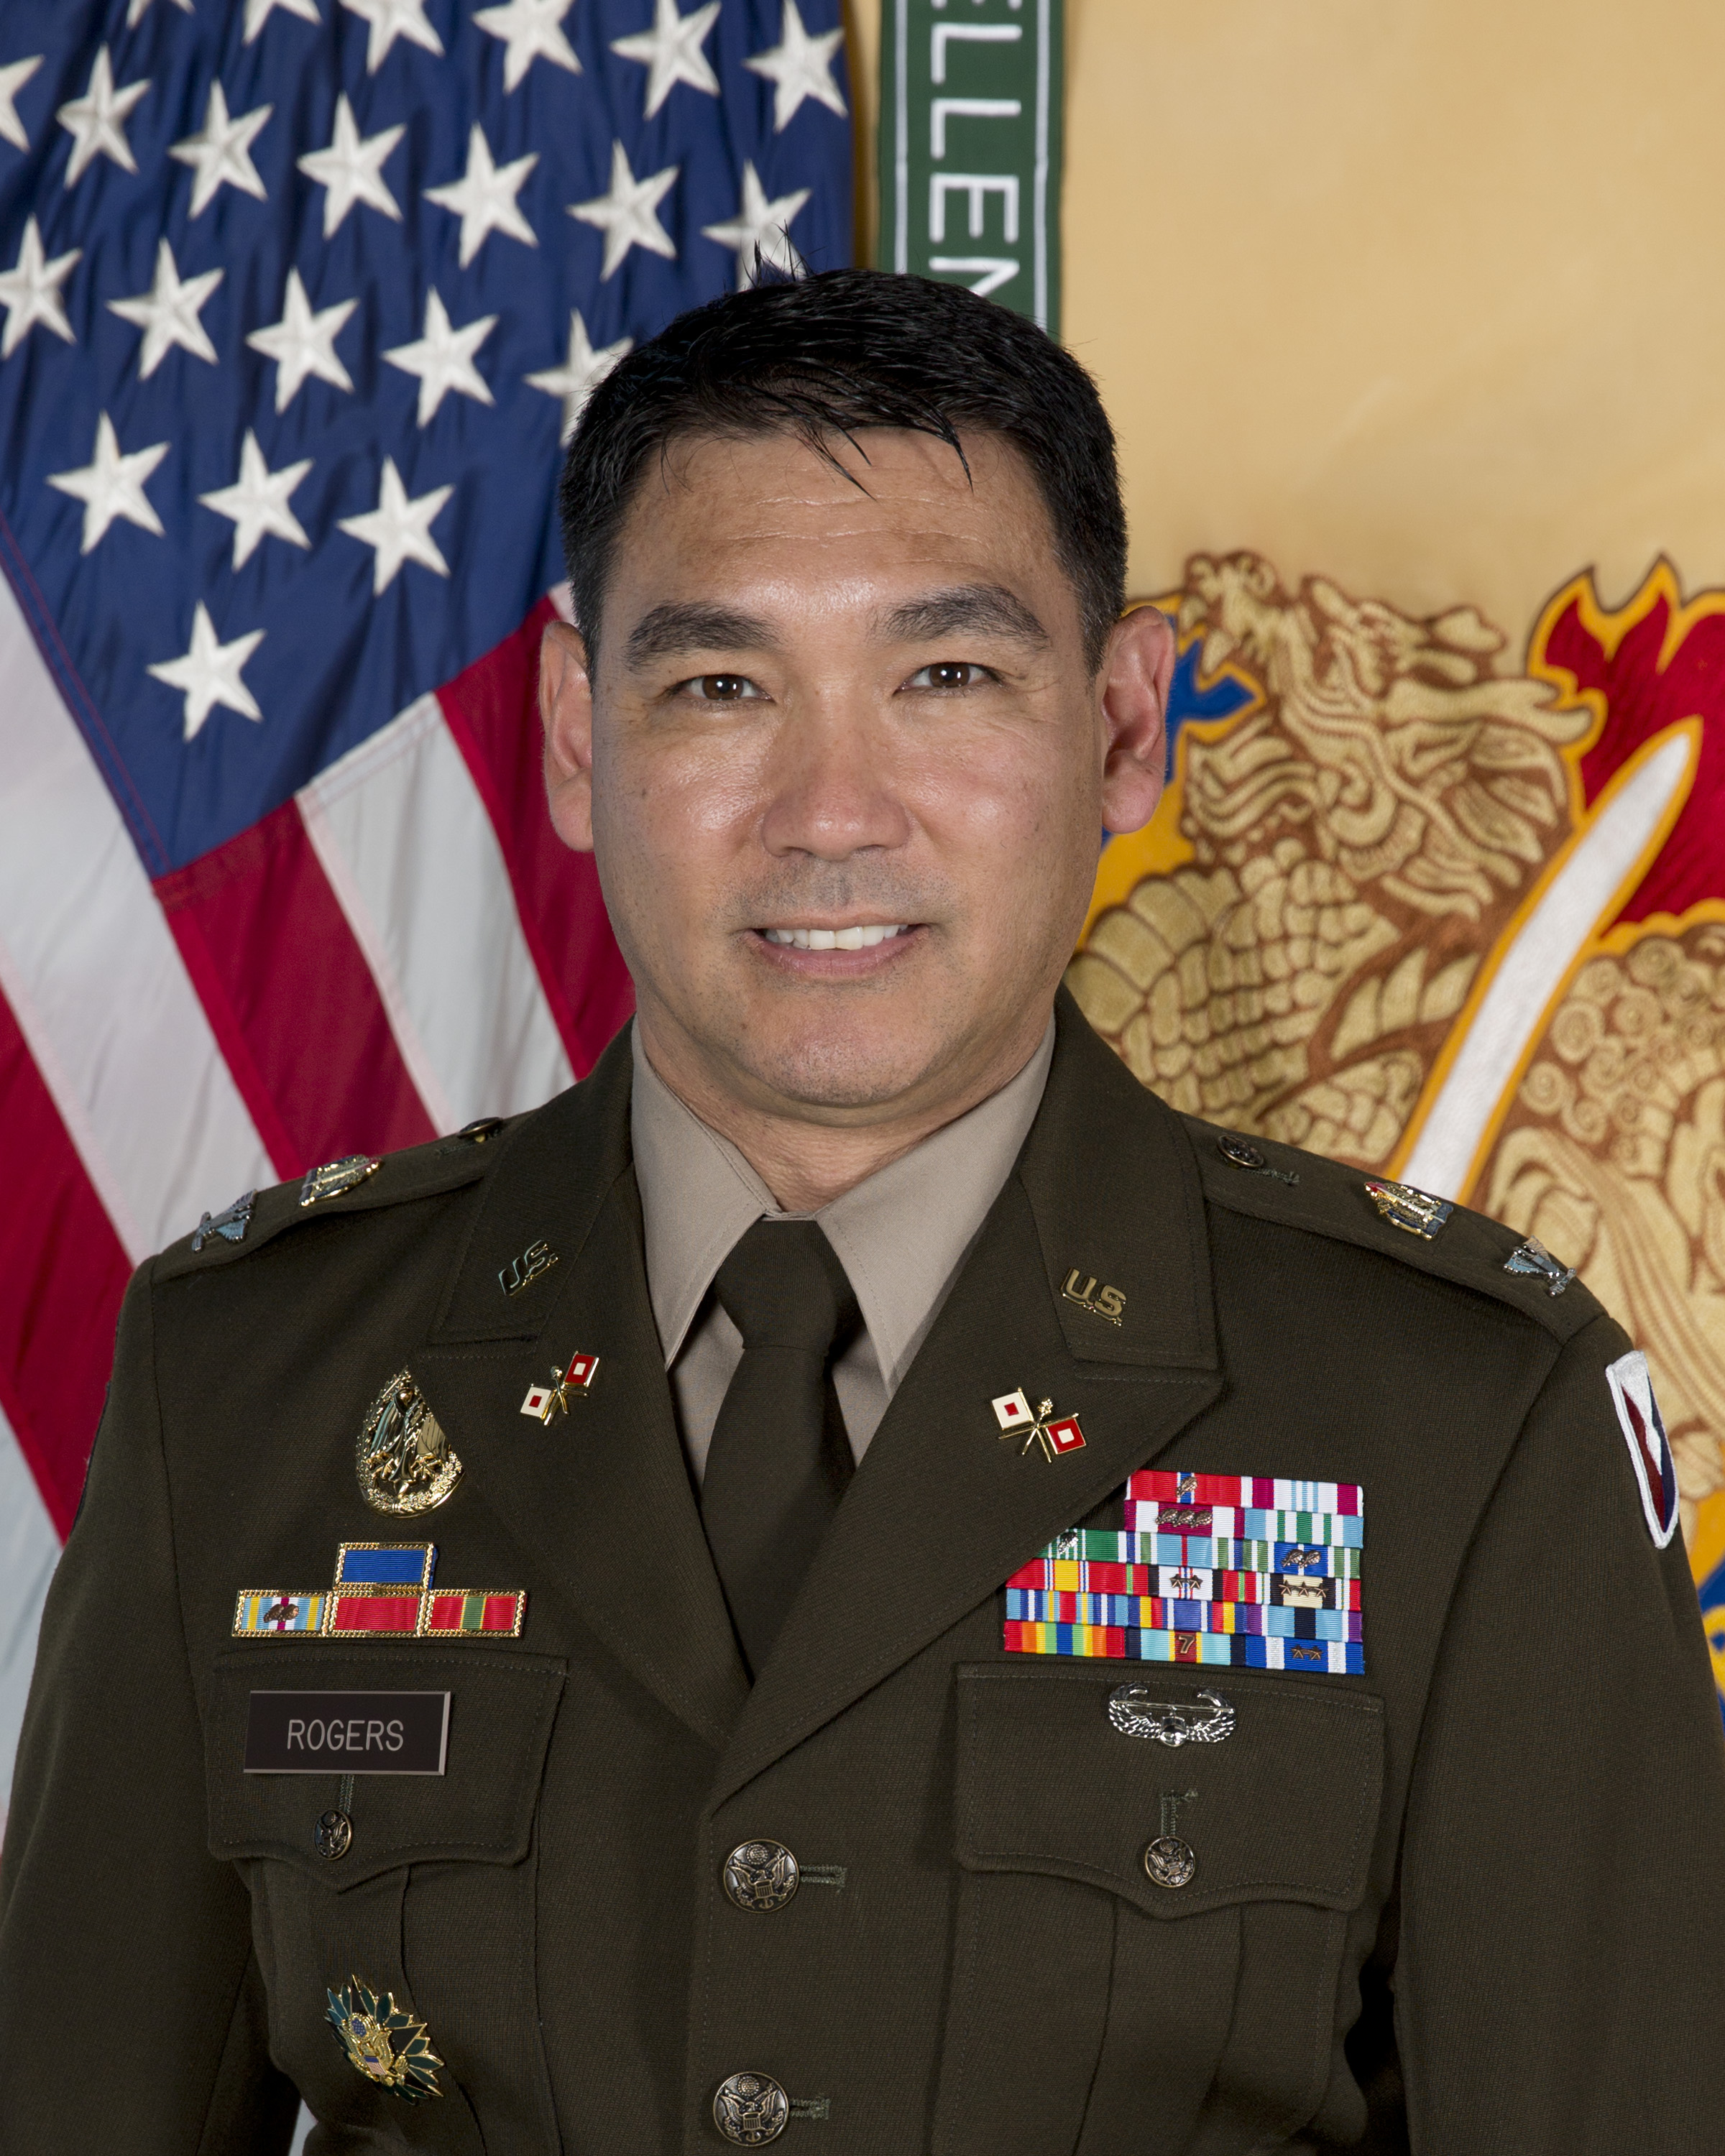 USFK Acquisition Management Chief - Colonel Anthony B. Rogers